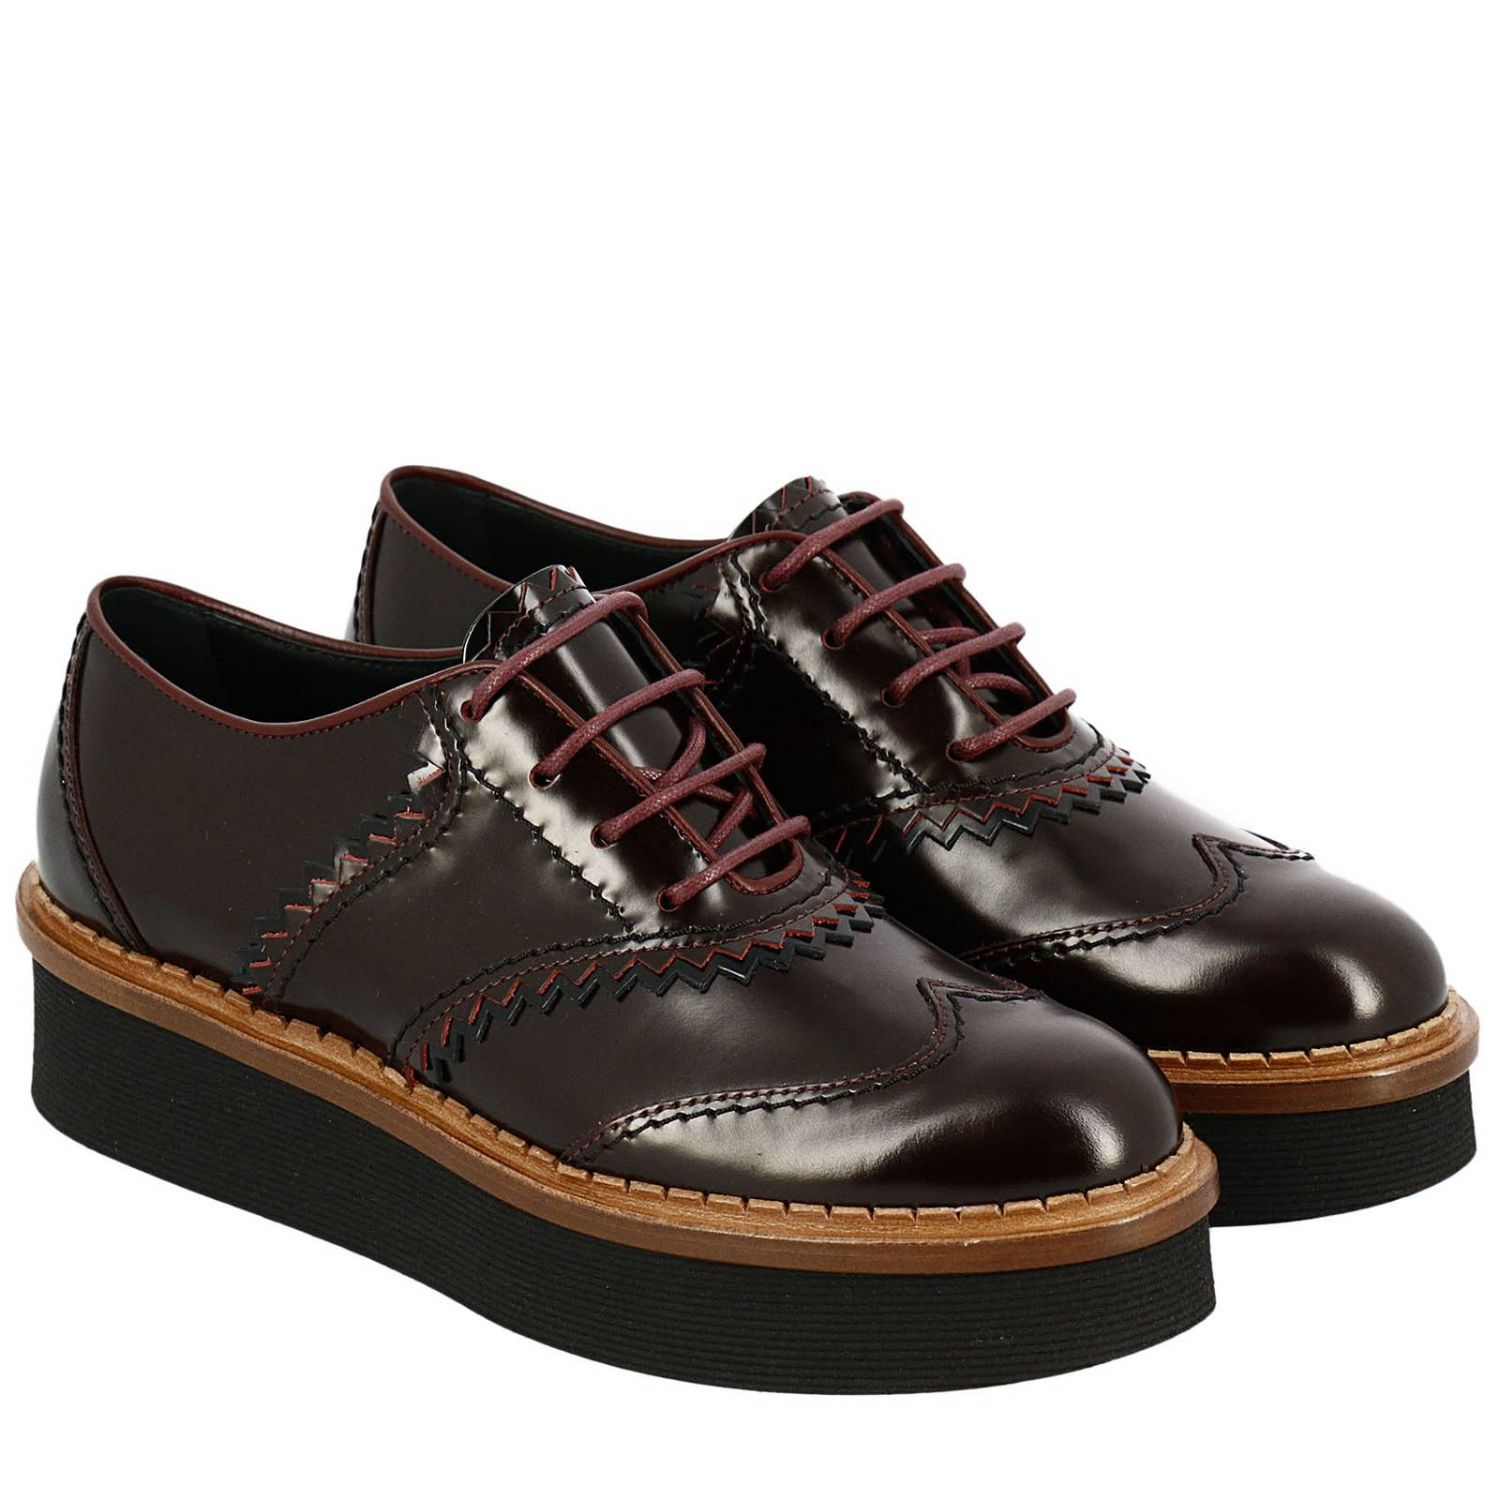 Tods Outlet: Shoes women Tod's | Oxford Shoes Tods Women Burgundy ...